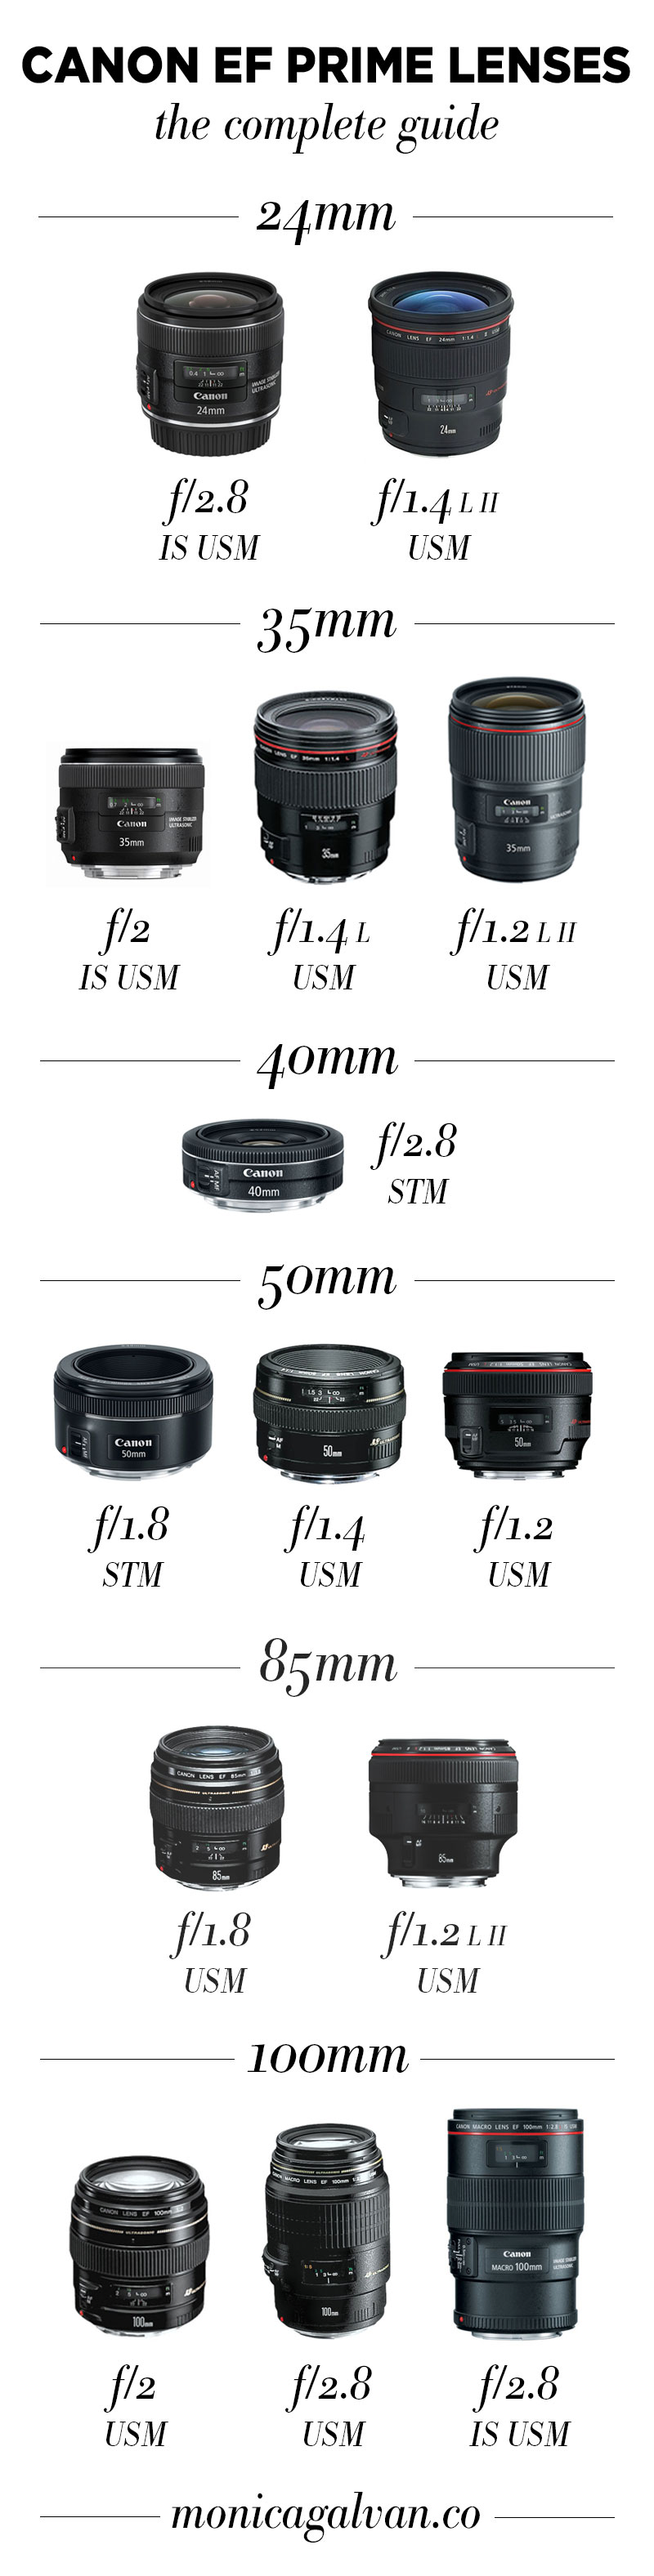 breed pauze Geslaagd Canon Prime Lens Guide — M.